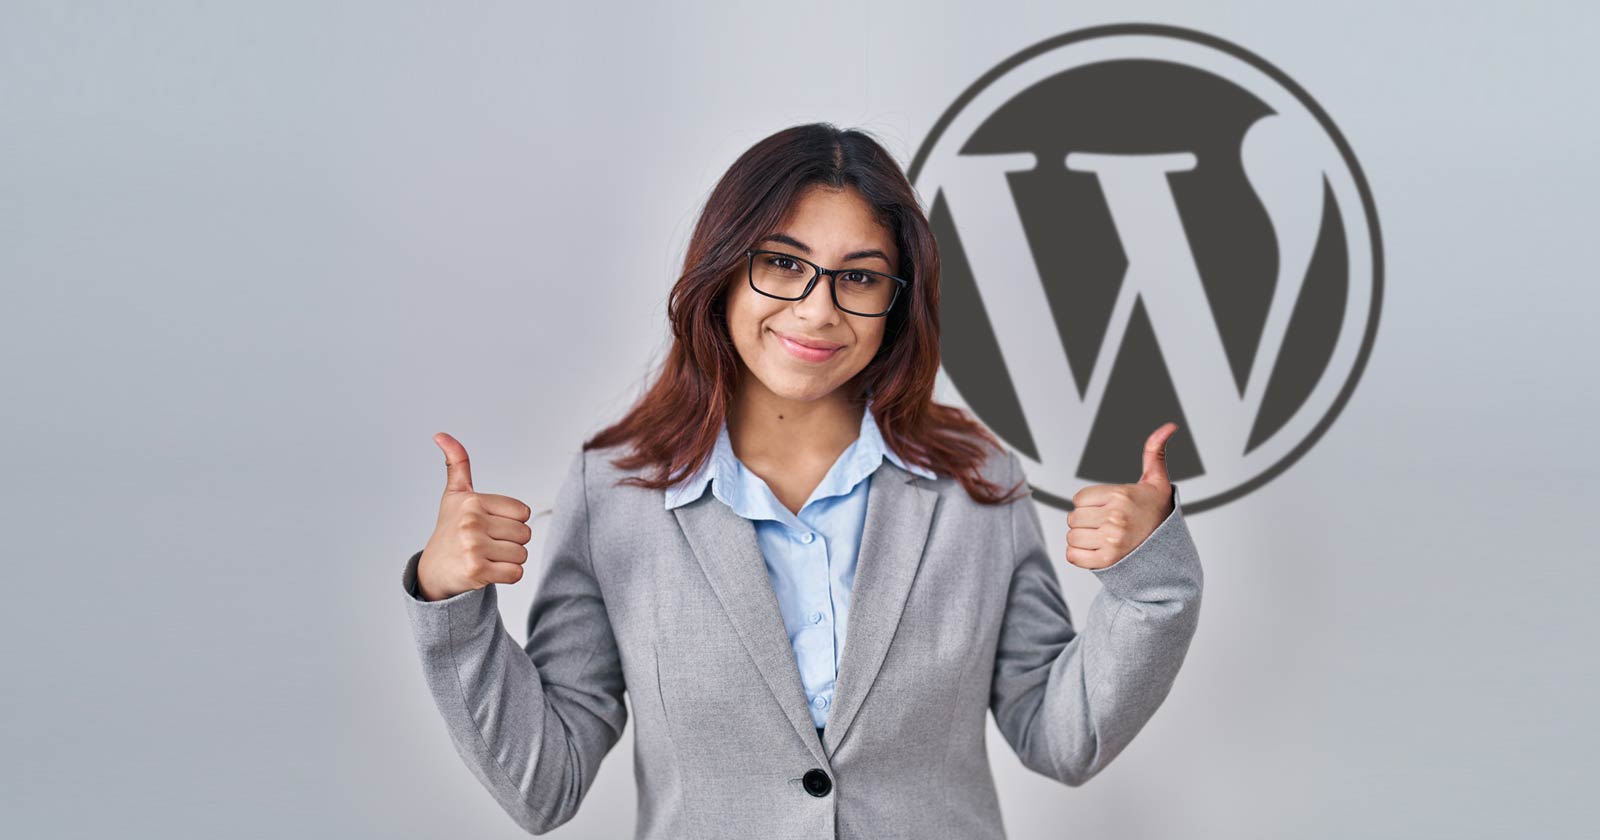 Image of a woman making the thumbs up sign with WordPress logo behind her